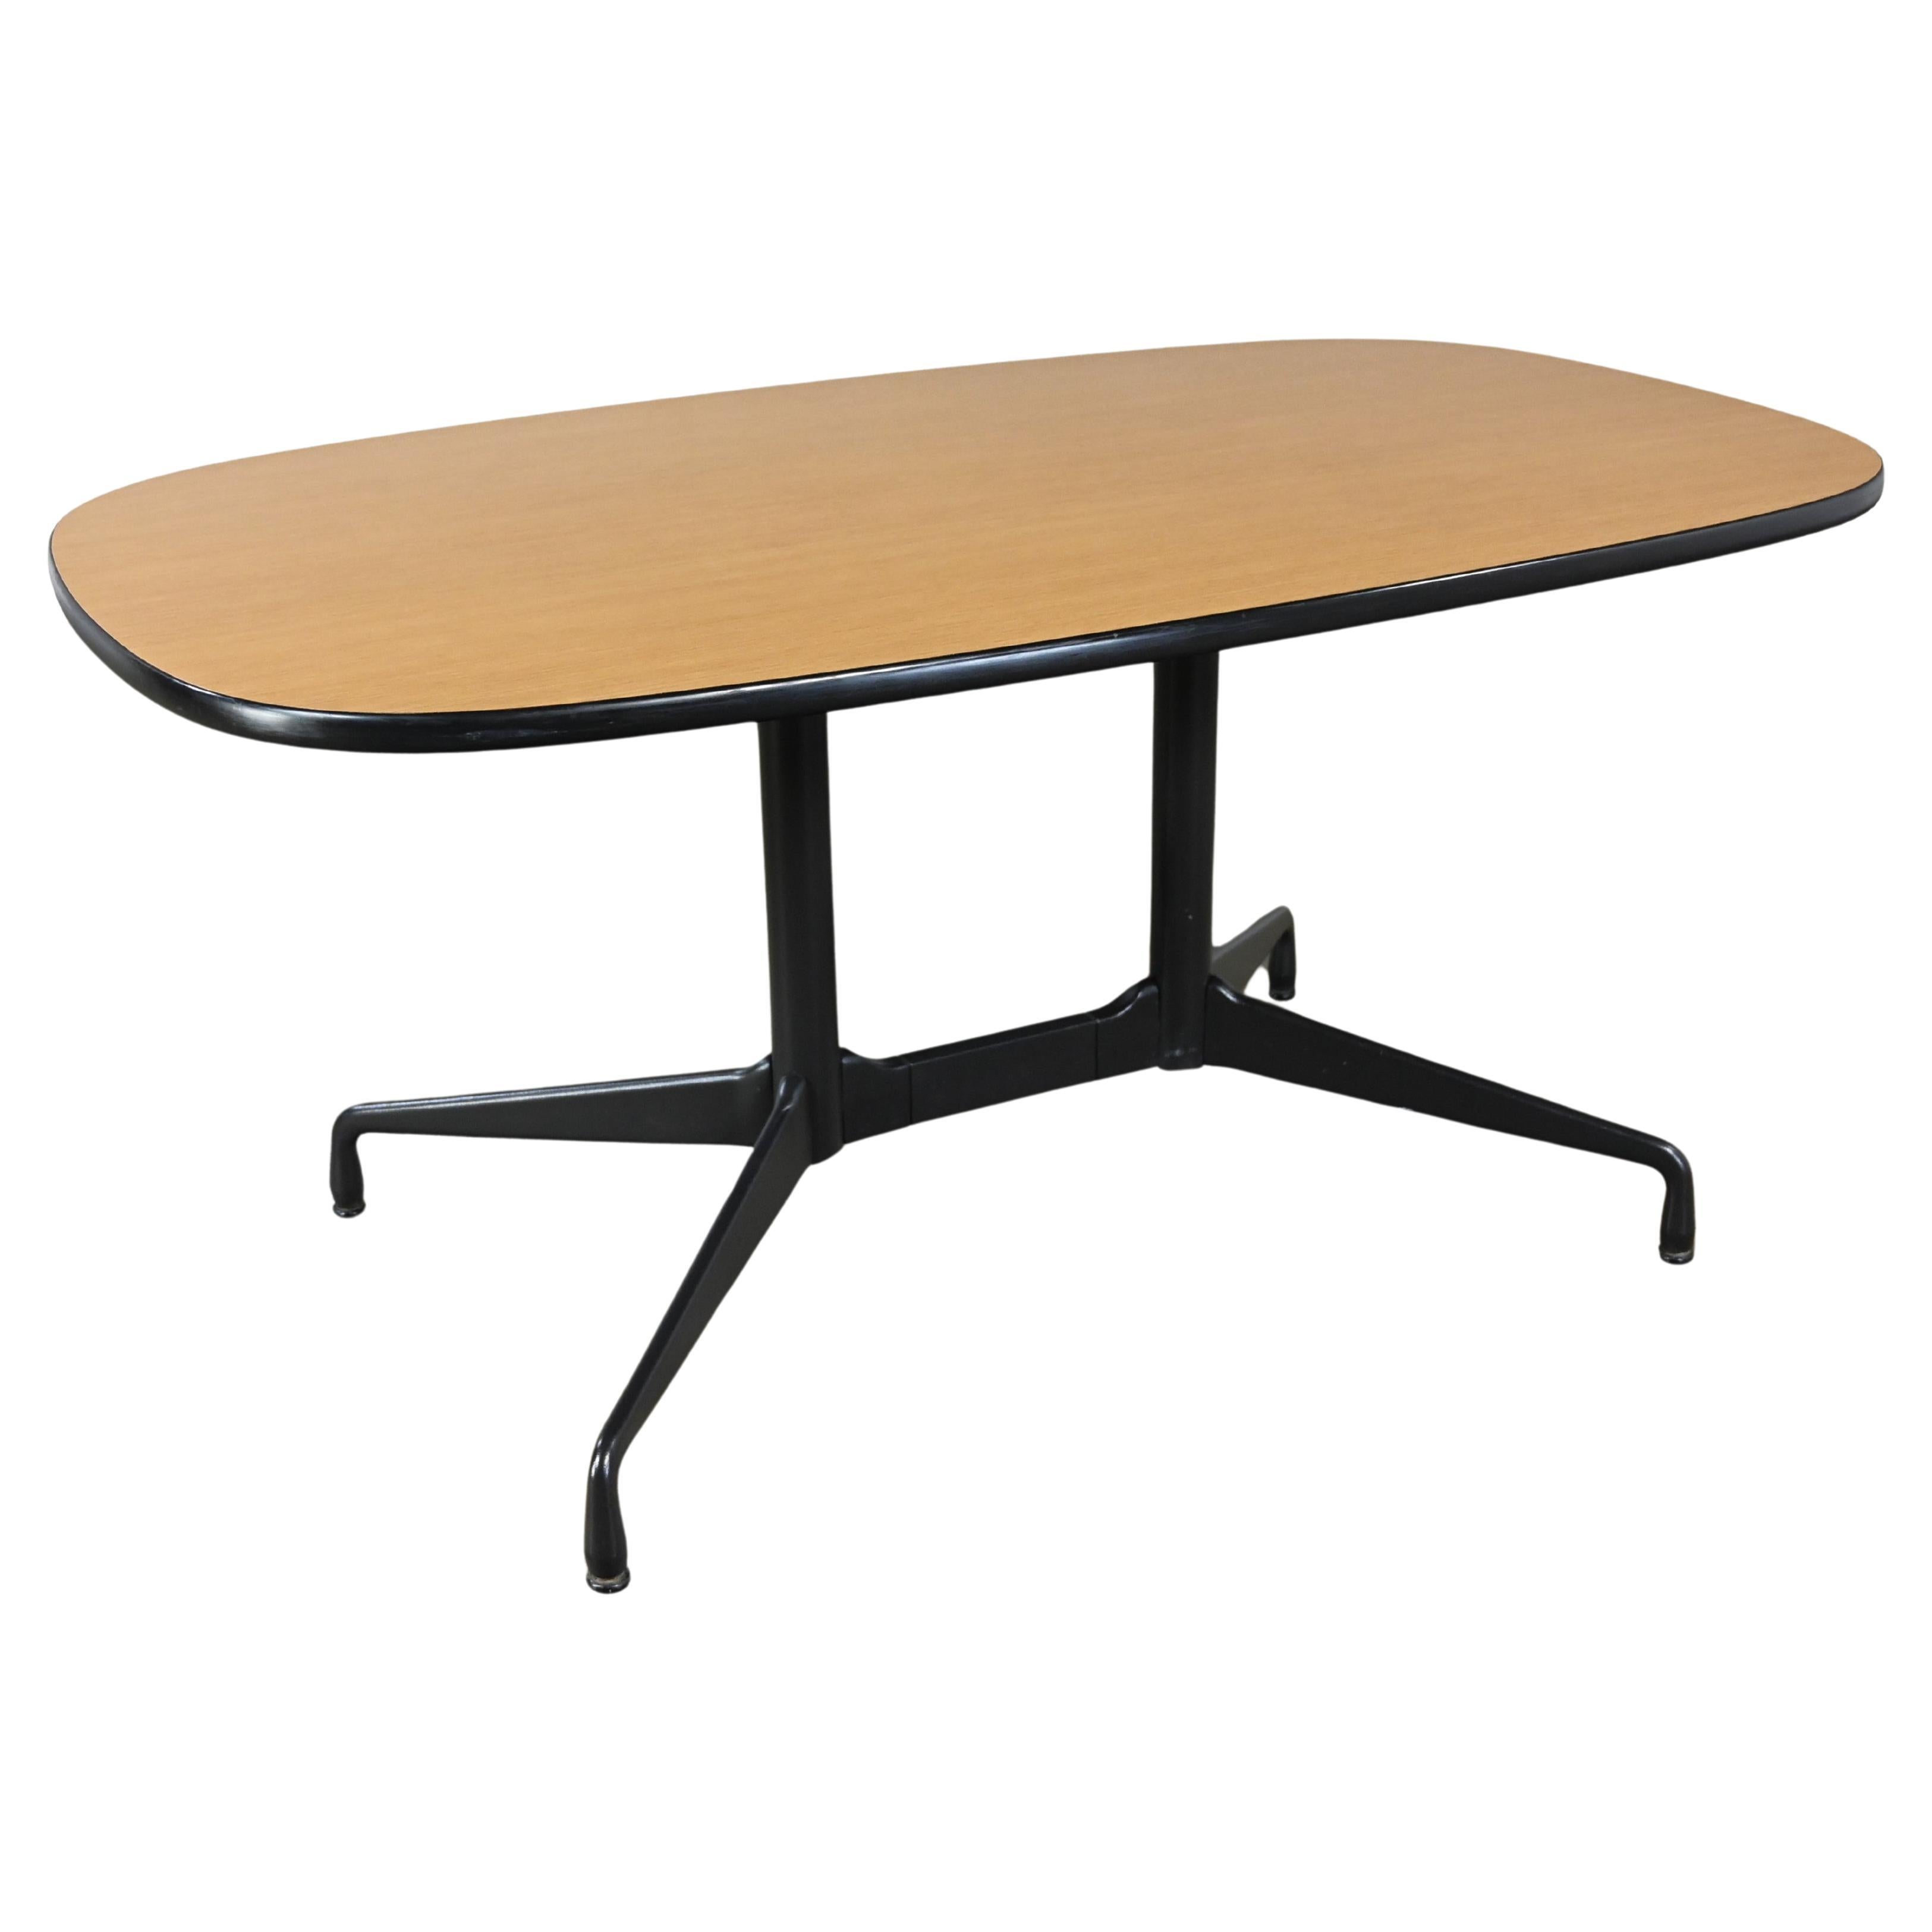 Eames Herman Miller Oval Conference Dining Table Universal Segmented Laminate #2